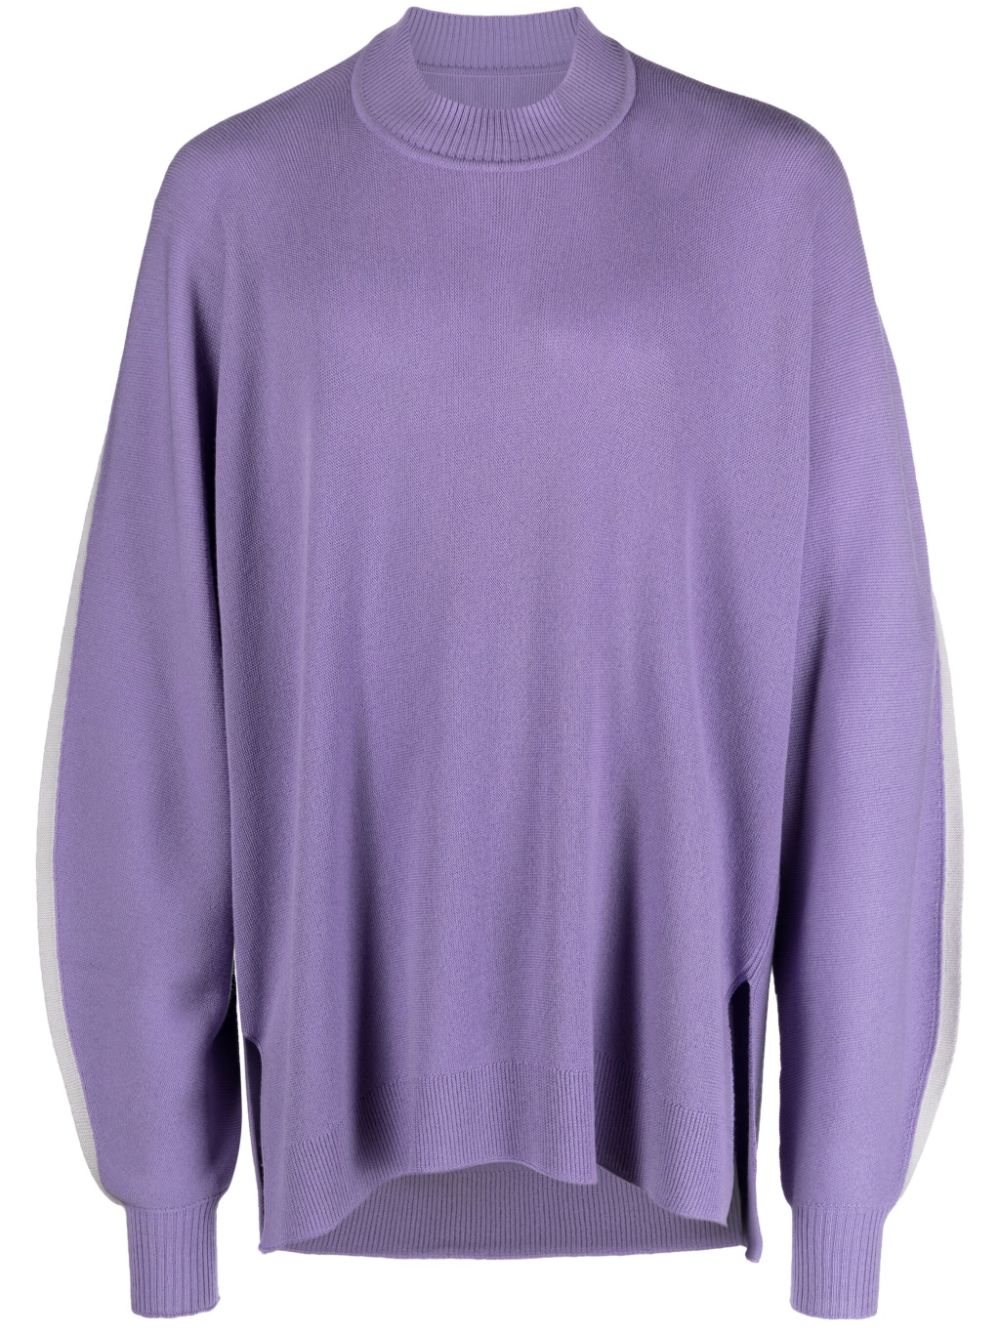 Homme Plissé Issey Miyake ribbed-knit wool jumper - Purple von Homme Plissé Issey Miyake